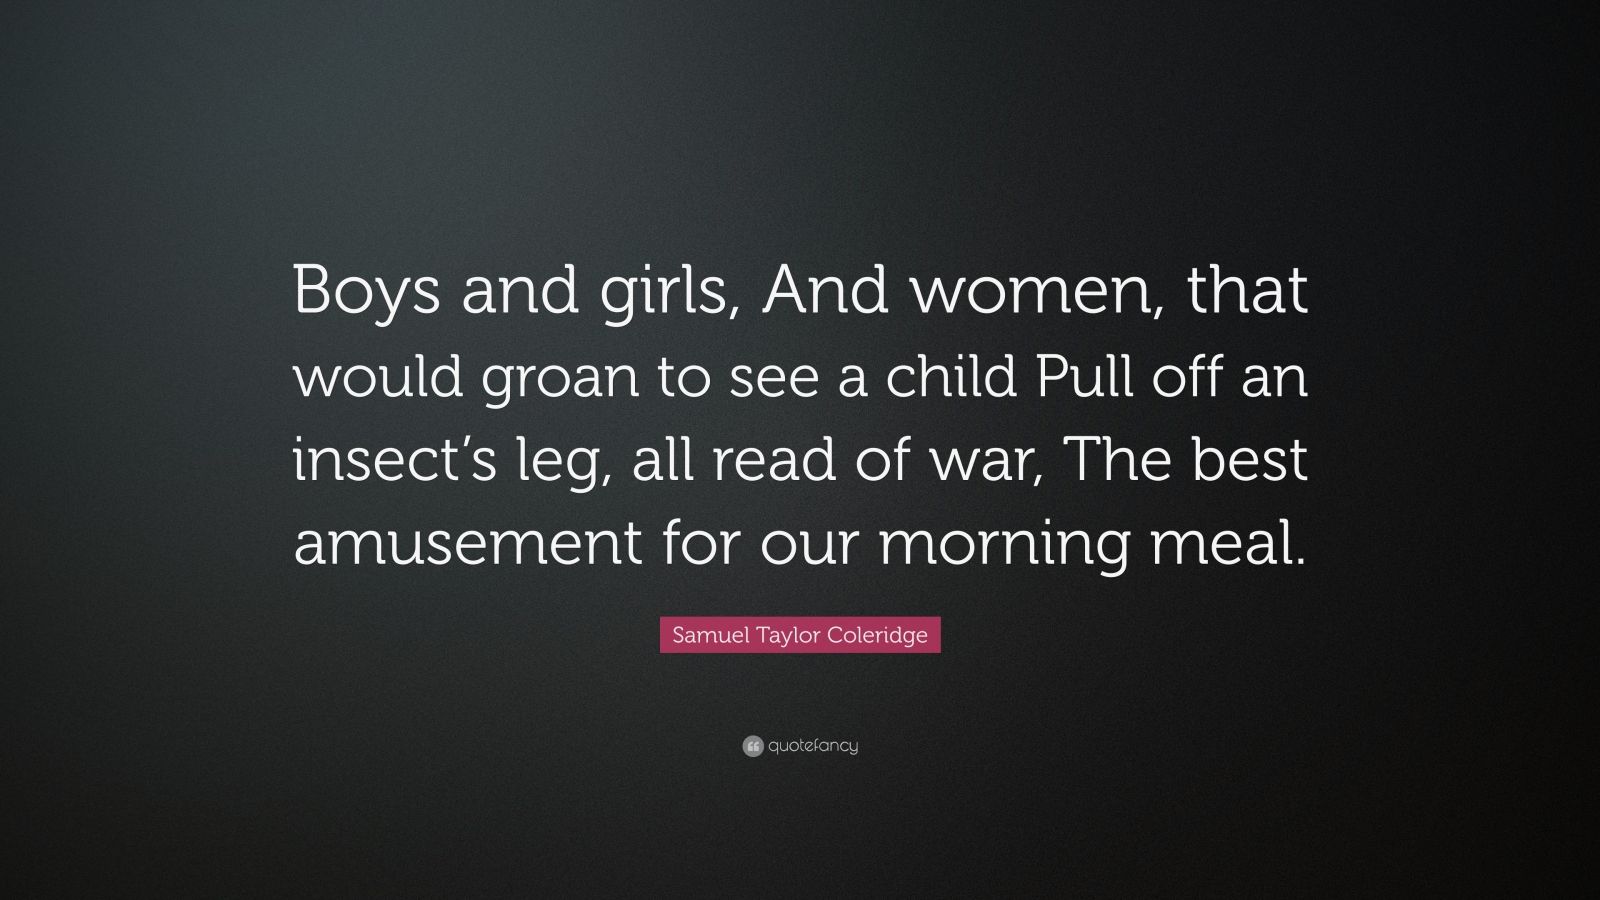 Samuel Taylor Coleridge Quote: “Boys and girls, And women, that would groan to see a ...